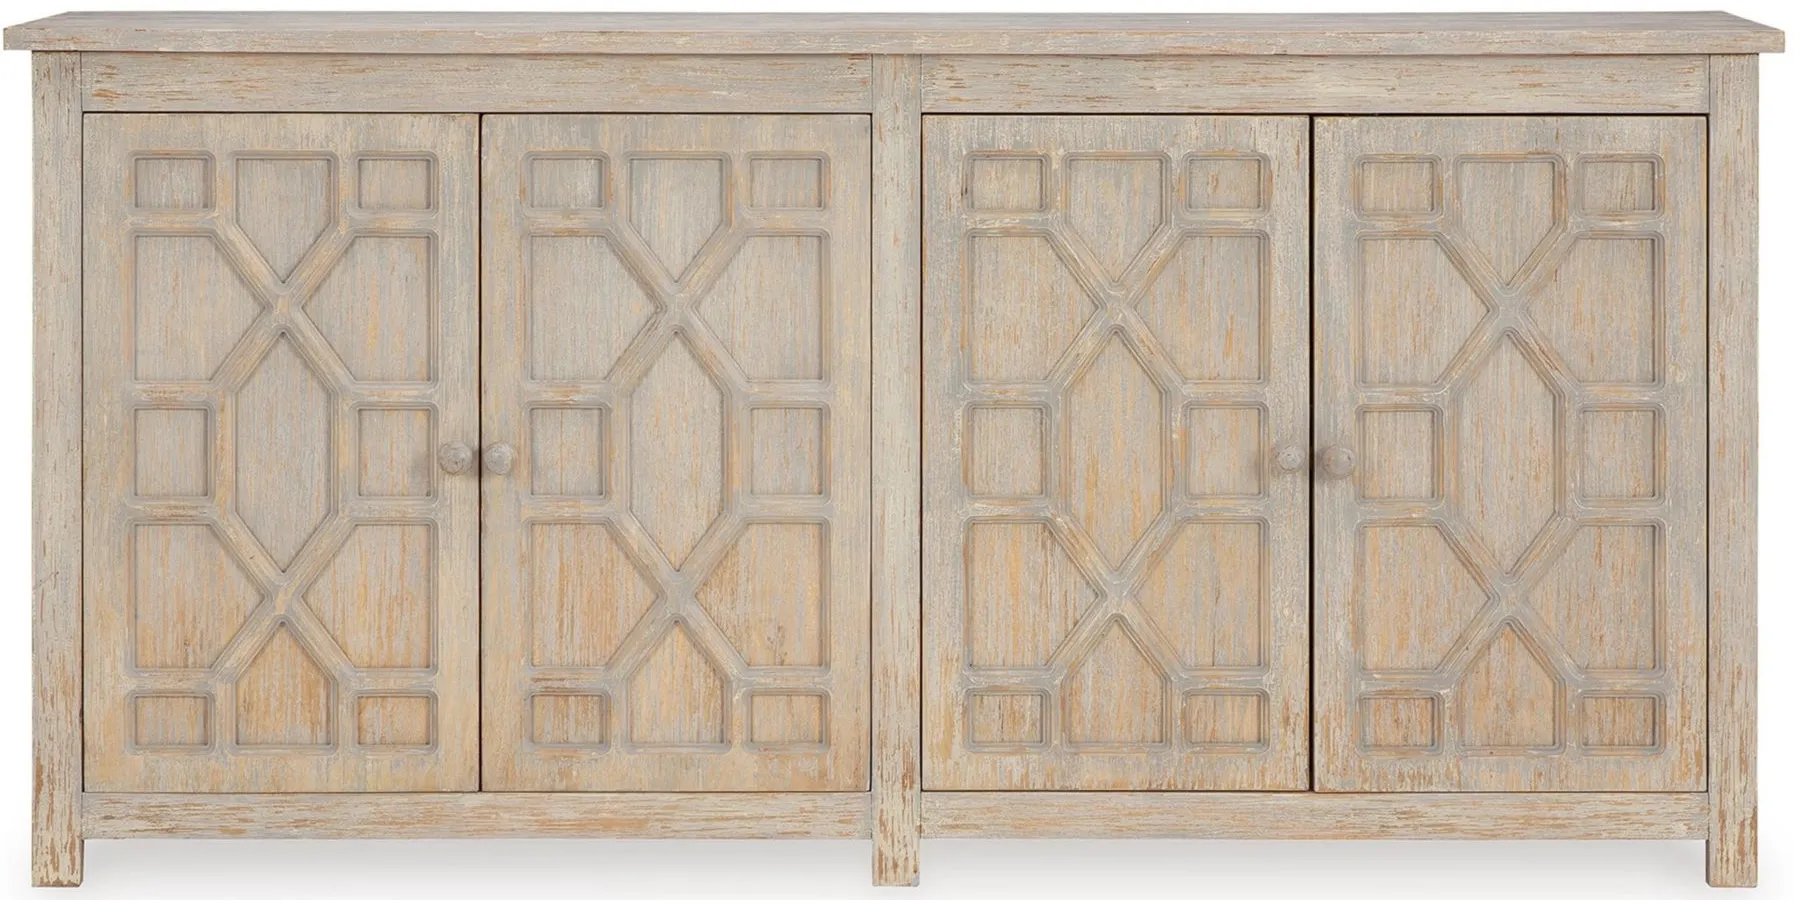 Caitrich Accent Cabinet in Distressed Blue by Ashley Furniture